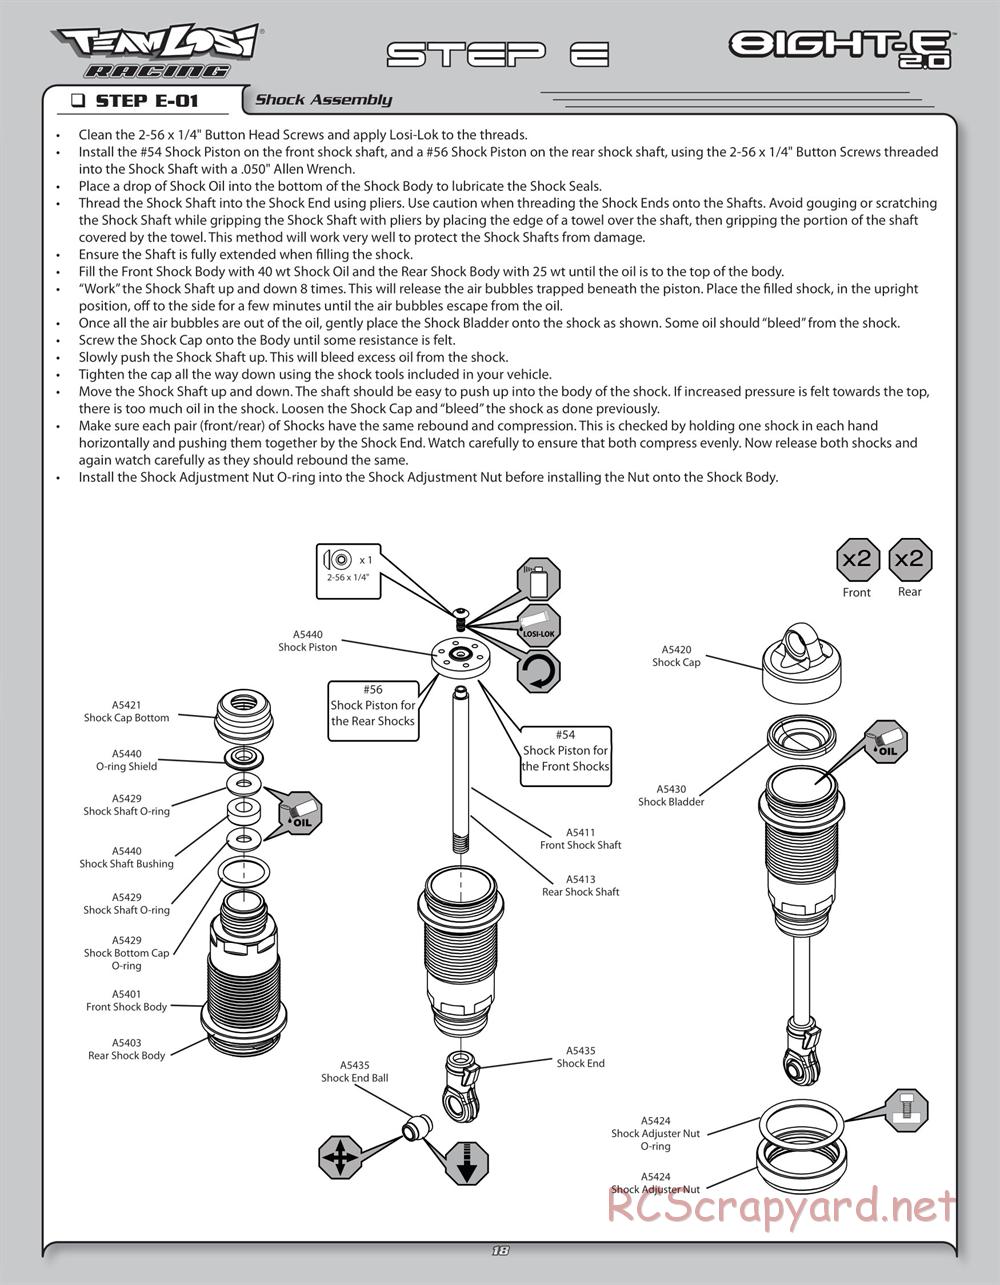 Team Losi - 8ight-E 2.0 Race Roller - Manual - Page 21